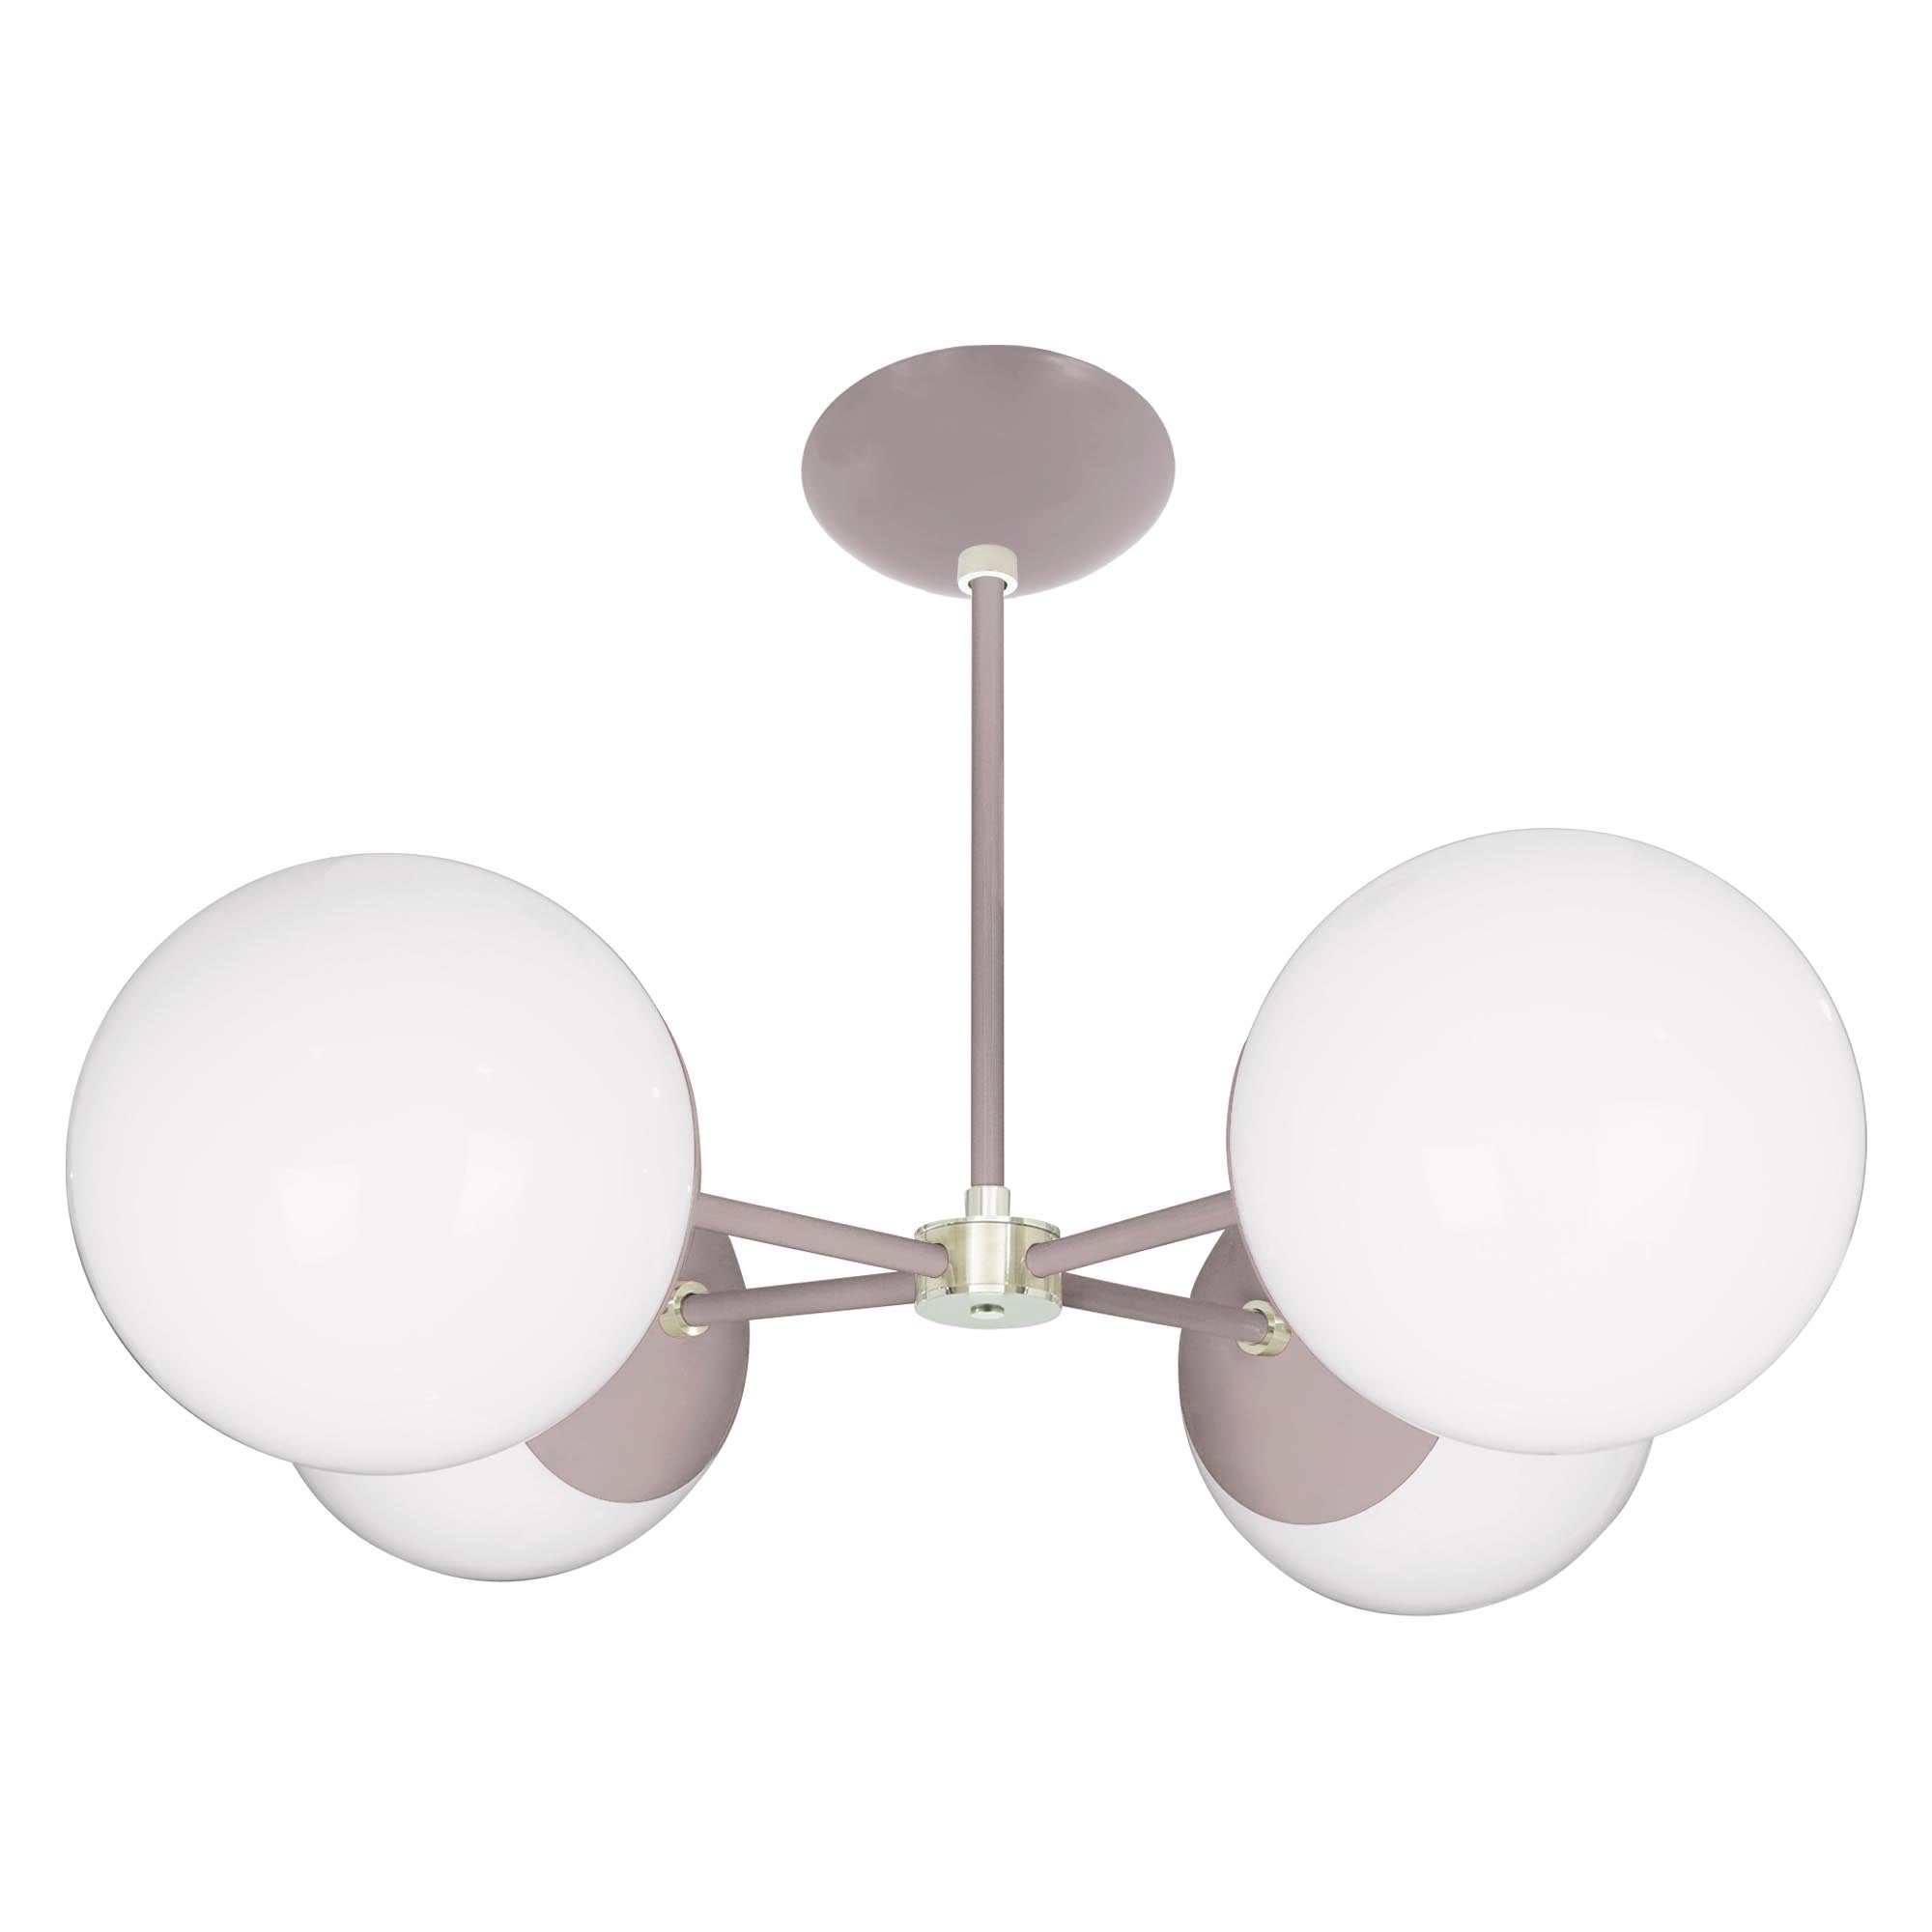 Nickel and barely color Big Orbi chandelier Dutton Brown lighting